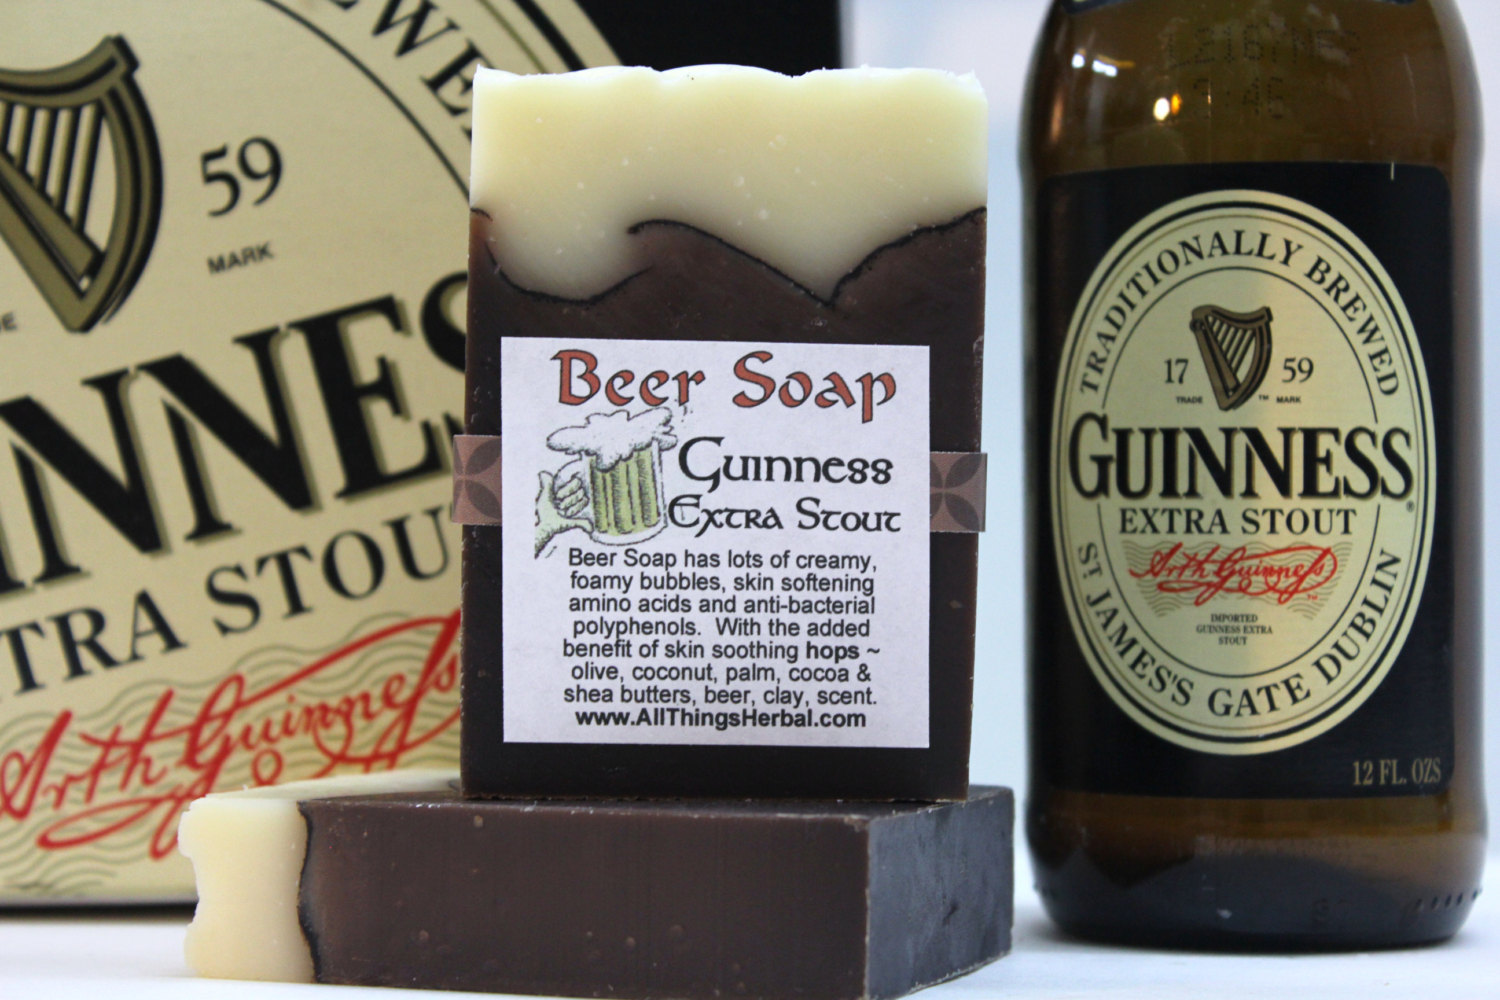 Beer Soap - Guinness to get you into a beer lather!